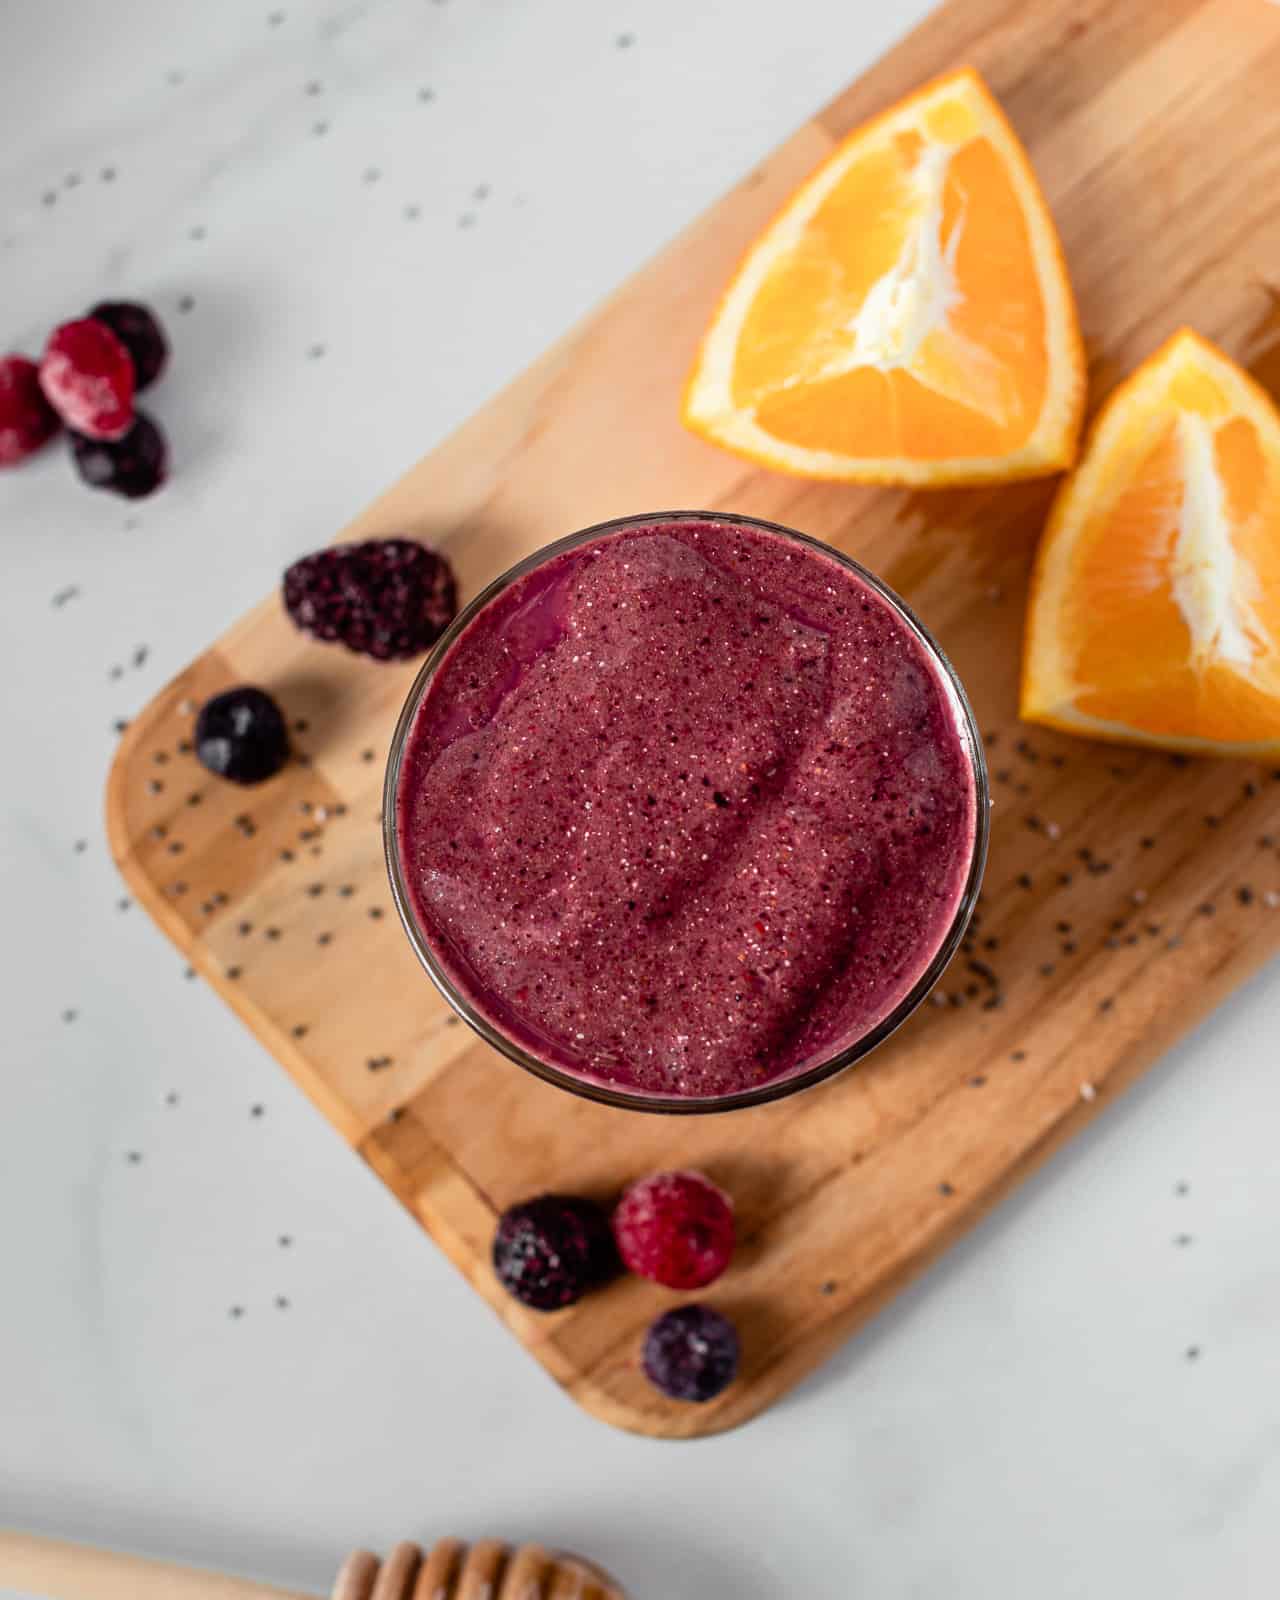 Immune-boosting smoothie for the winter days